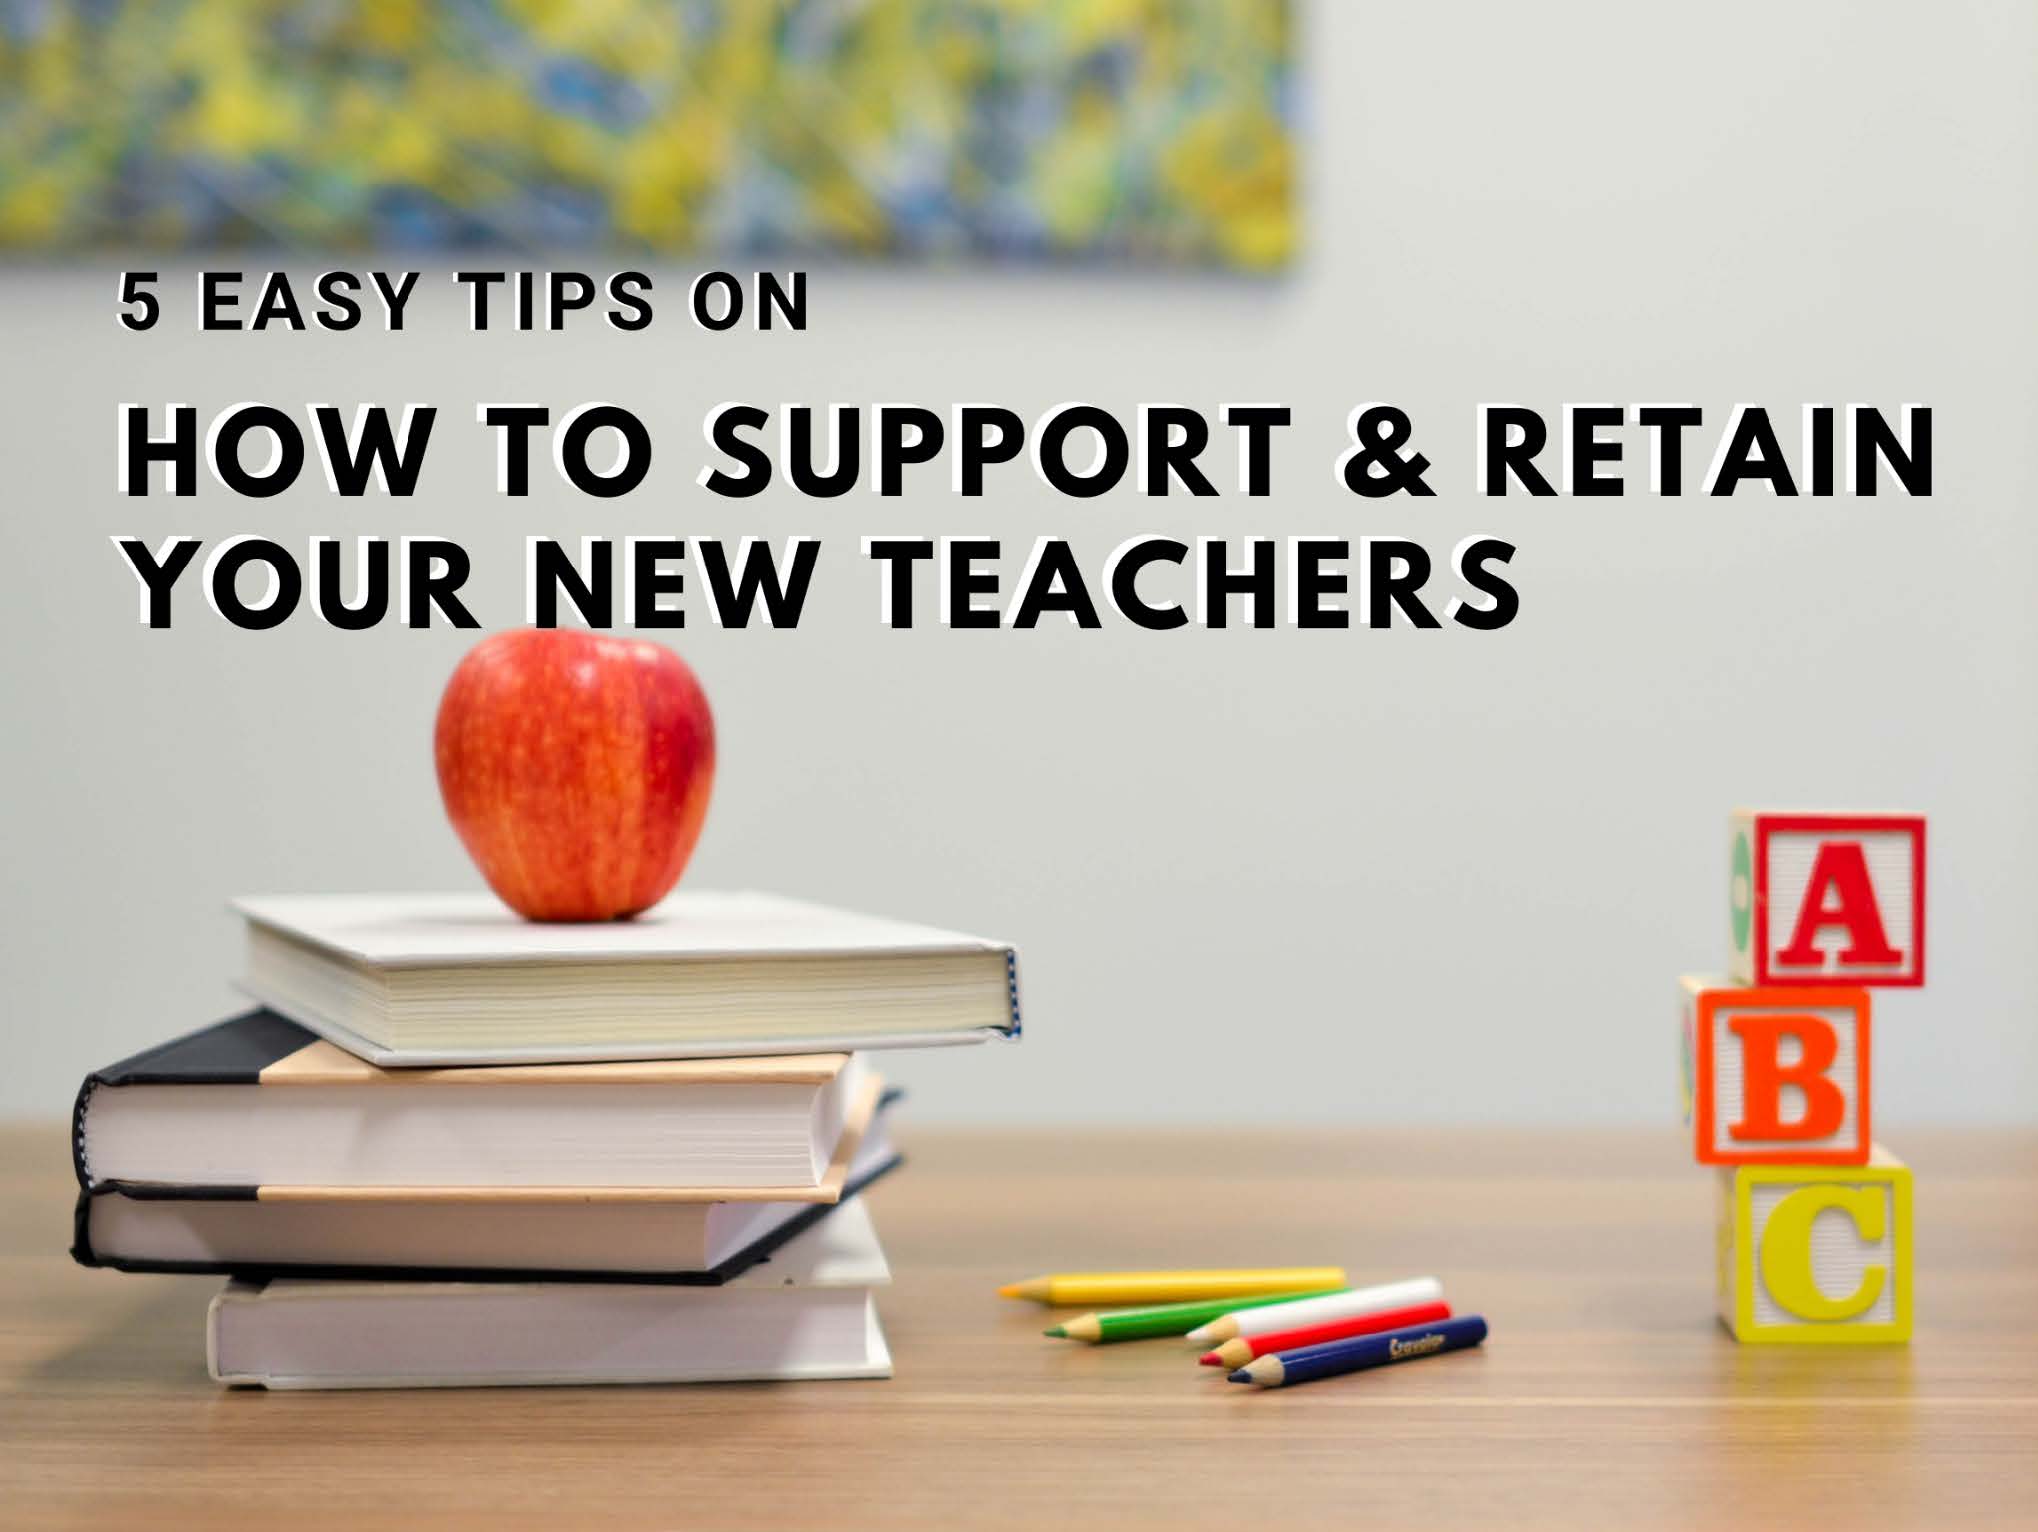 5 Easy Tips to Support New Teachers